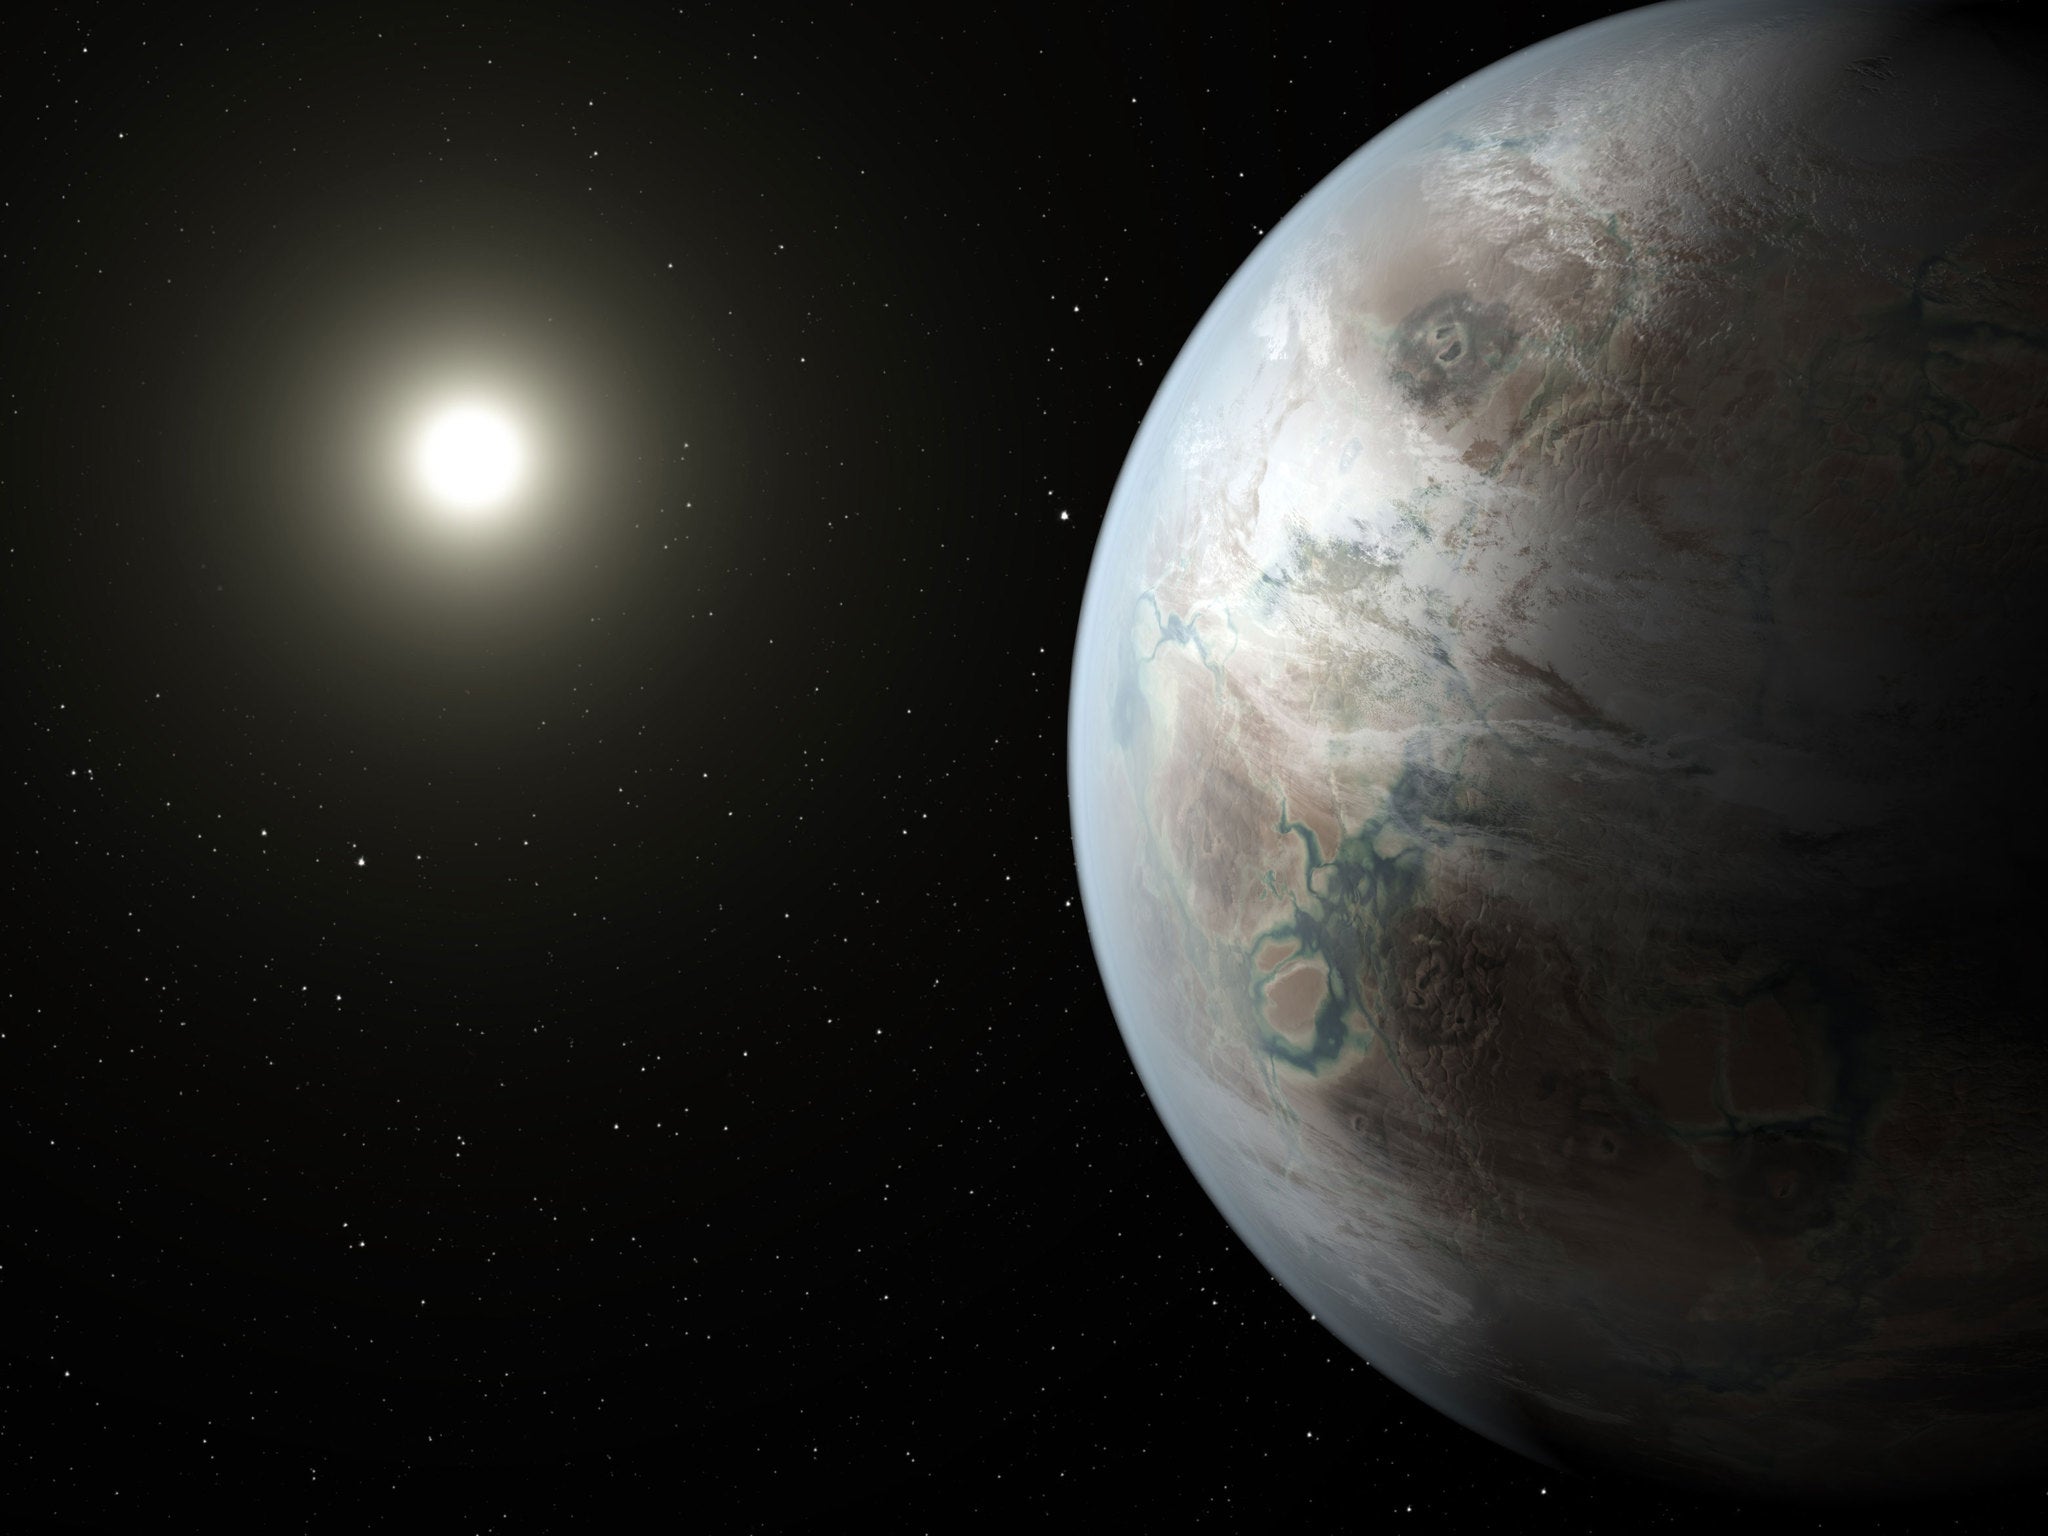 An artist's impression of Kepler 452b, the most Earth-like planet ever discovered